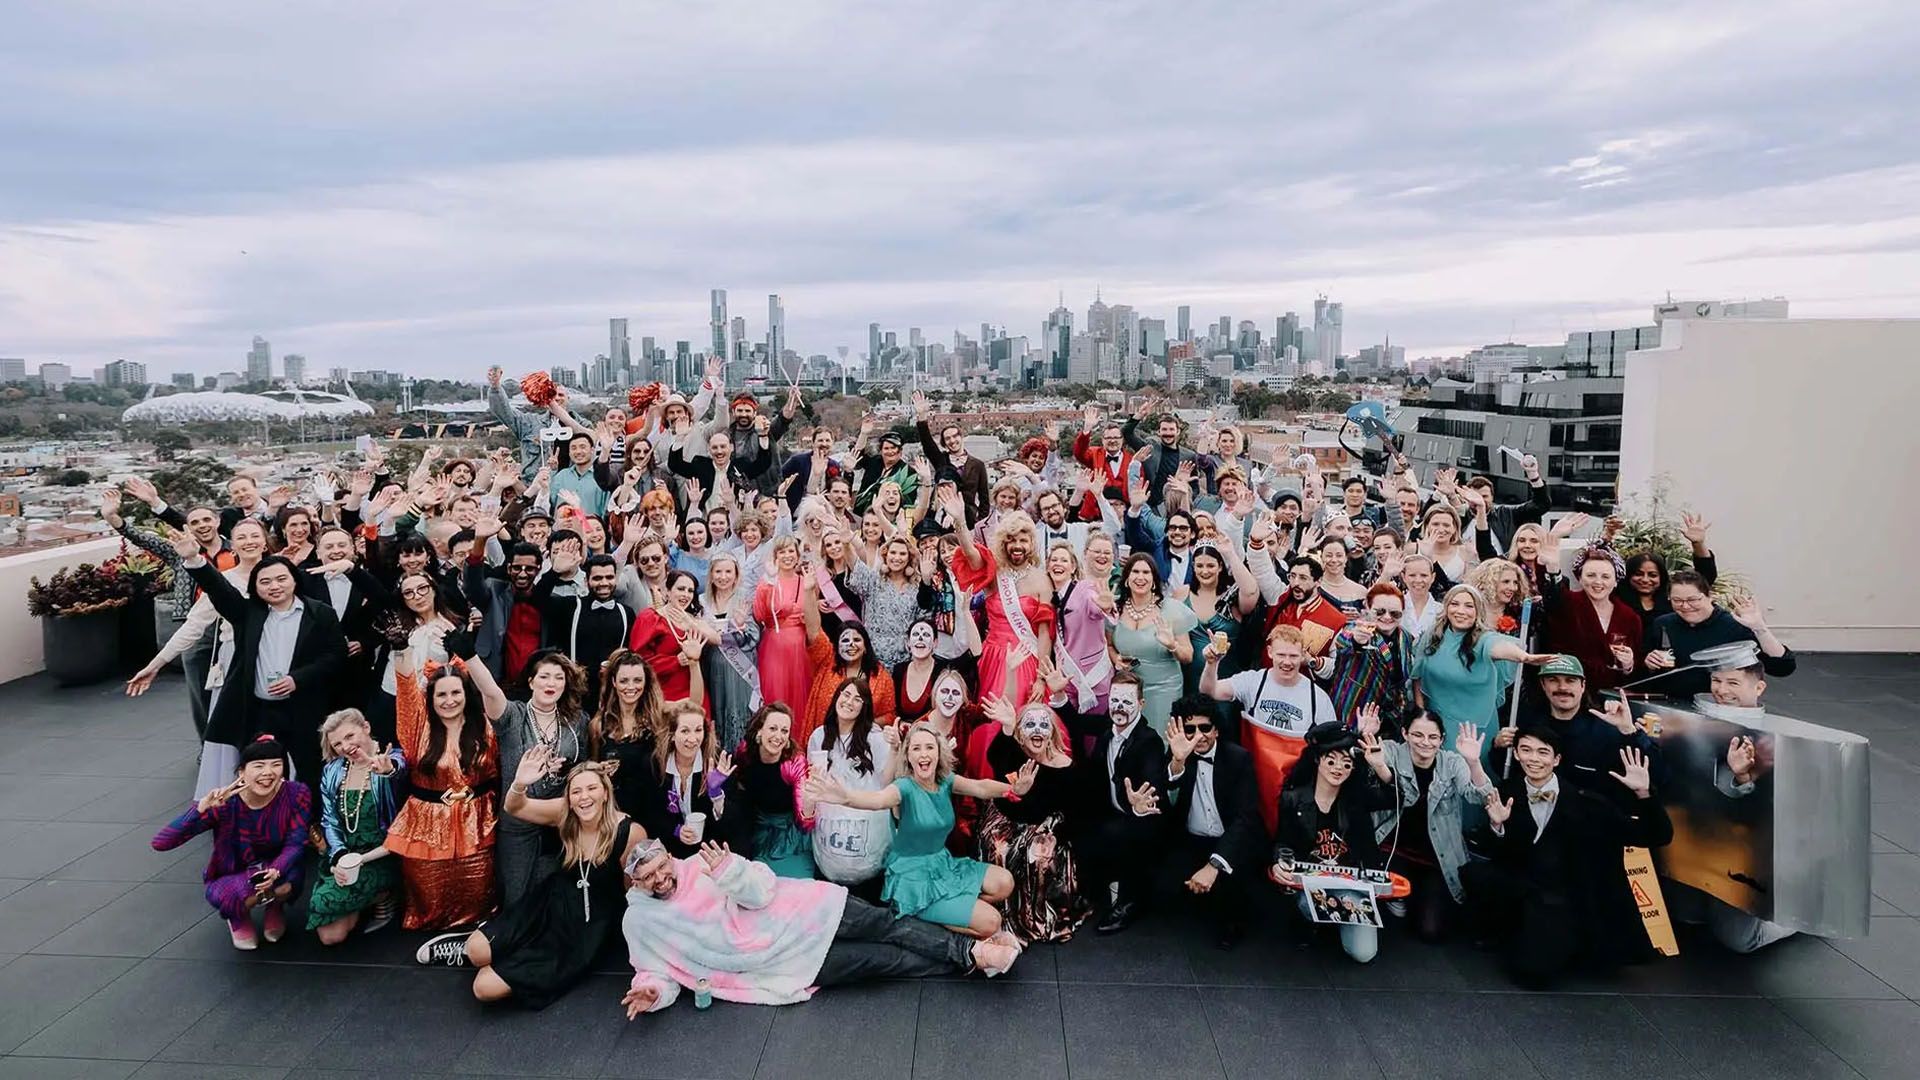 Photo of a large crowd of people on a rooftop, dressed in themed costume. The Melbourne Cricket Ground and Melbourne skyline is visible behind them.